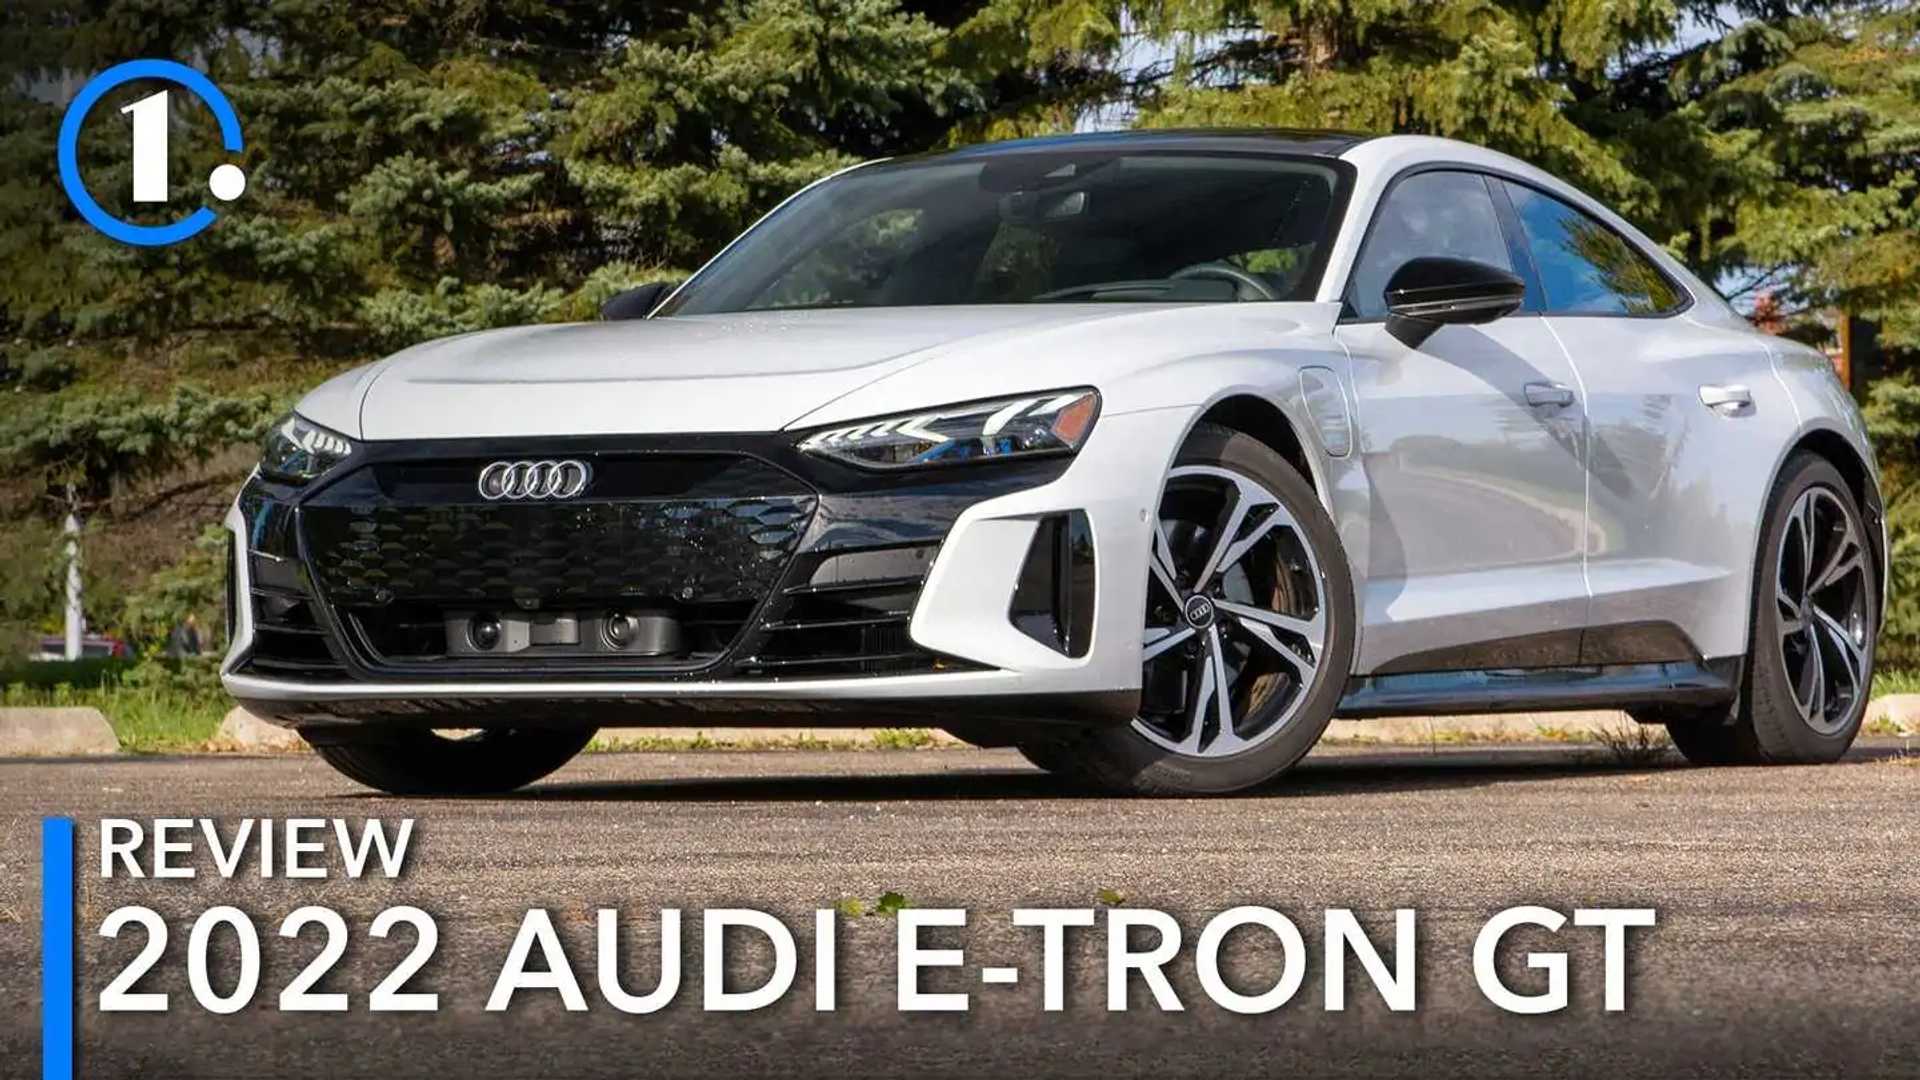  The 2024 Audi e-tron GT – Unraveling the Review, Pricing, and Specs